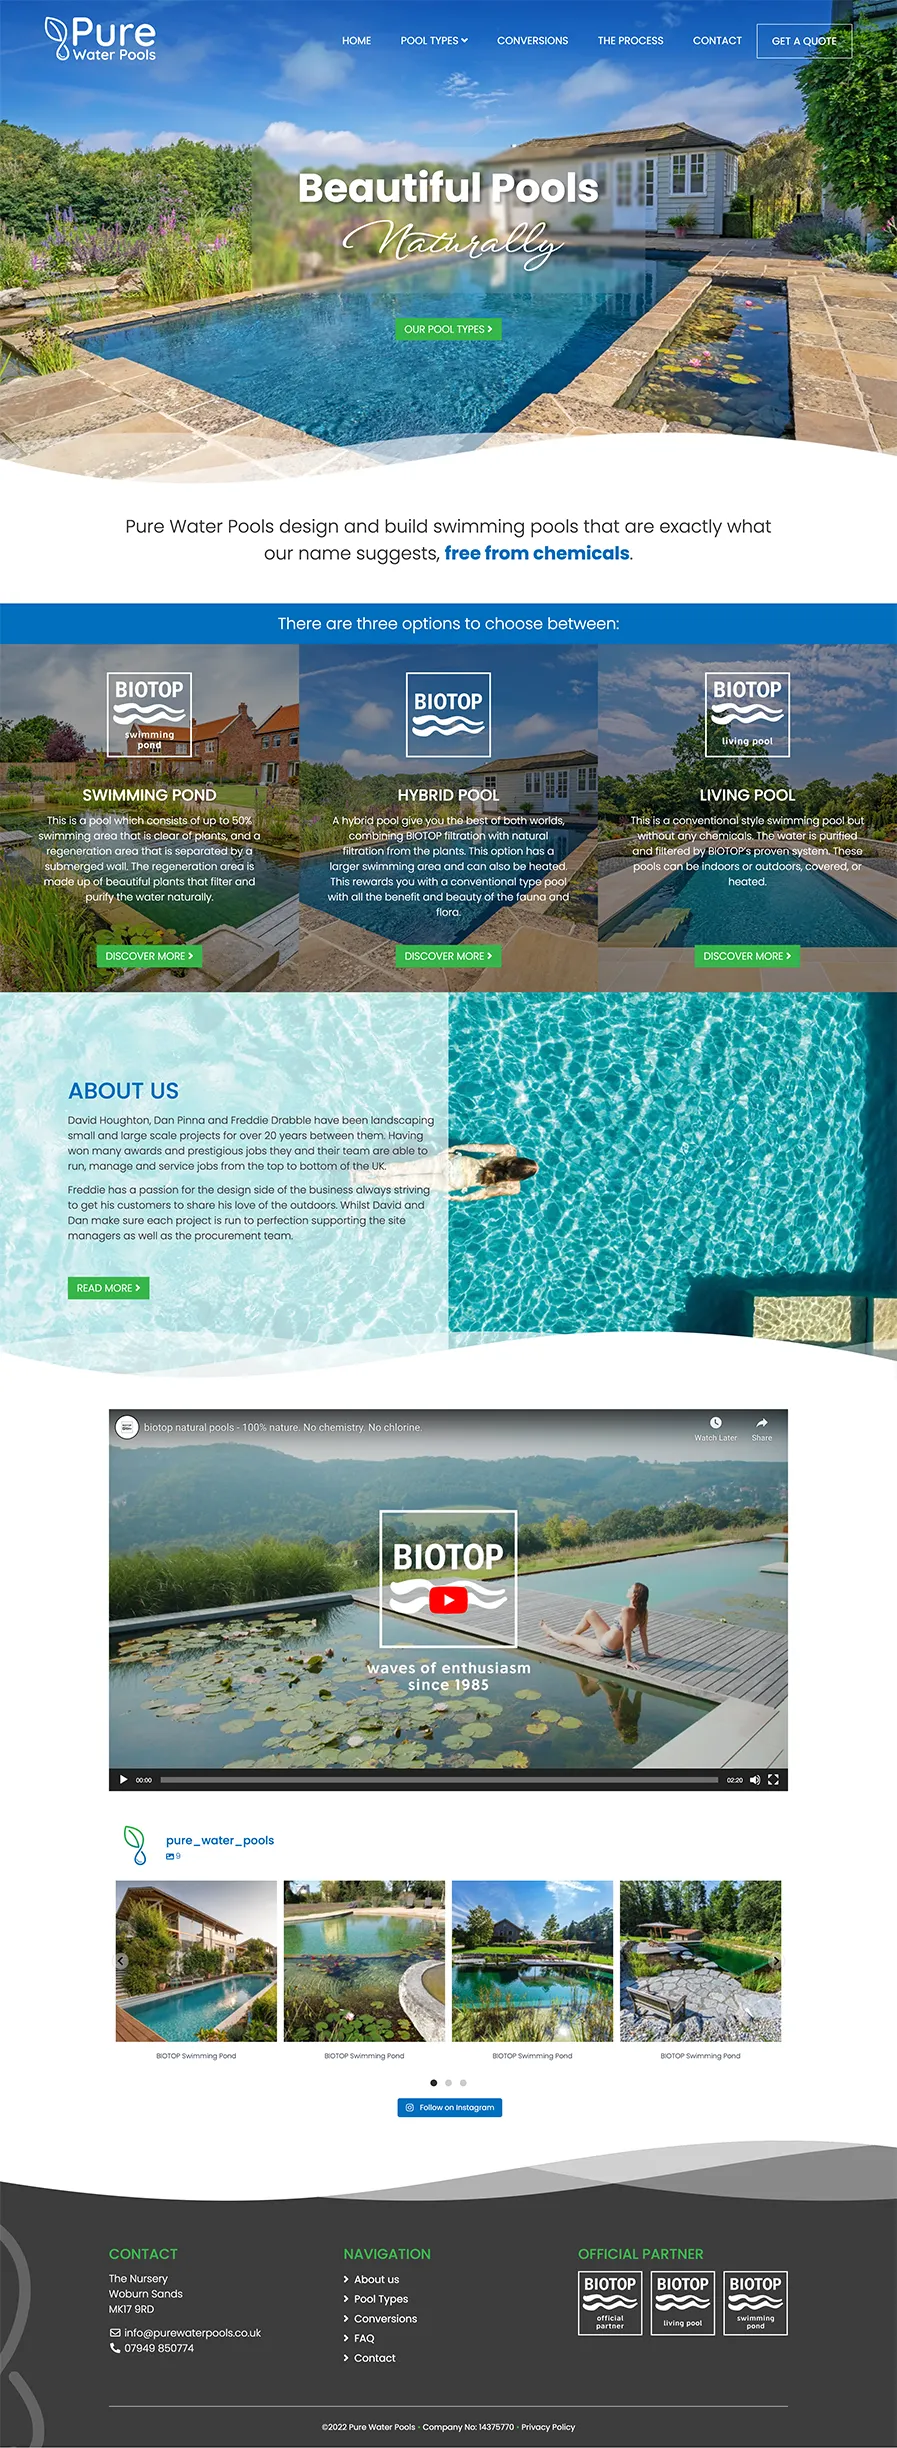 Pure Water Pools Home Page